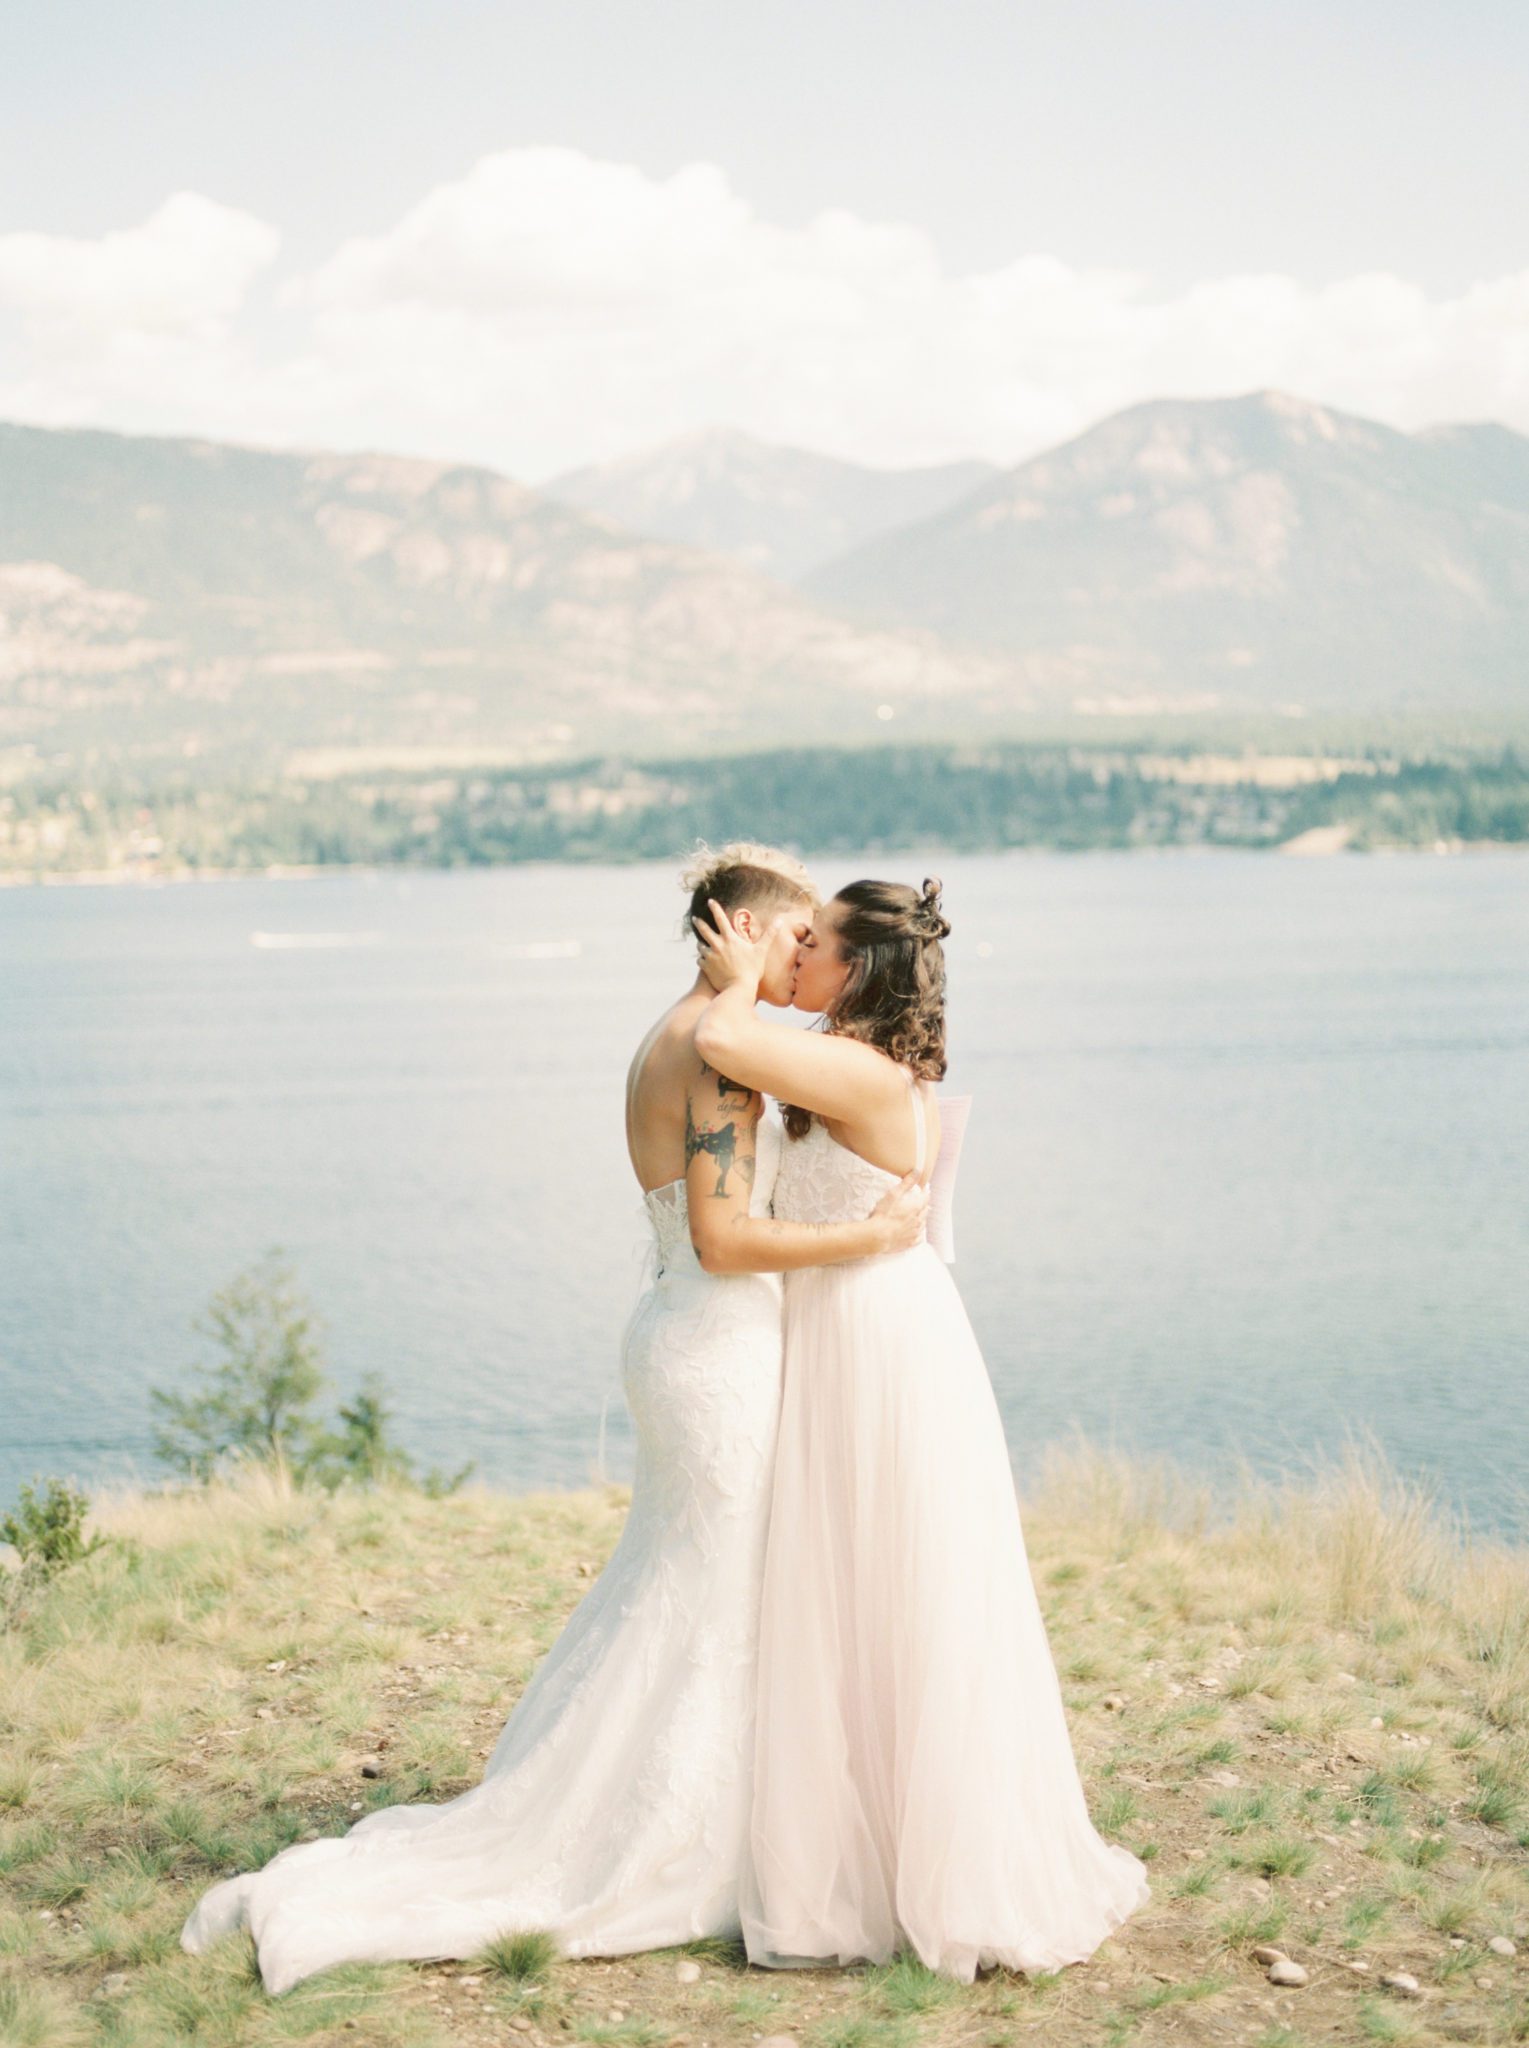 You'll Love the Scenic Views in this Bright and Airy Invermere Wedding Ceremony